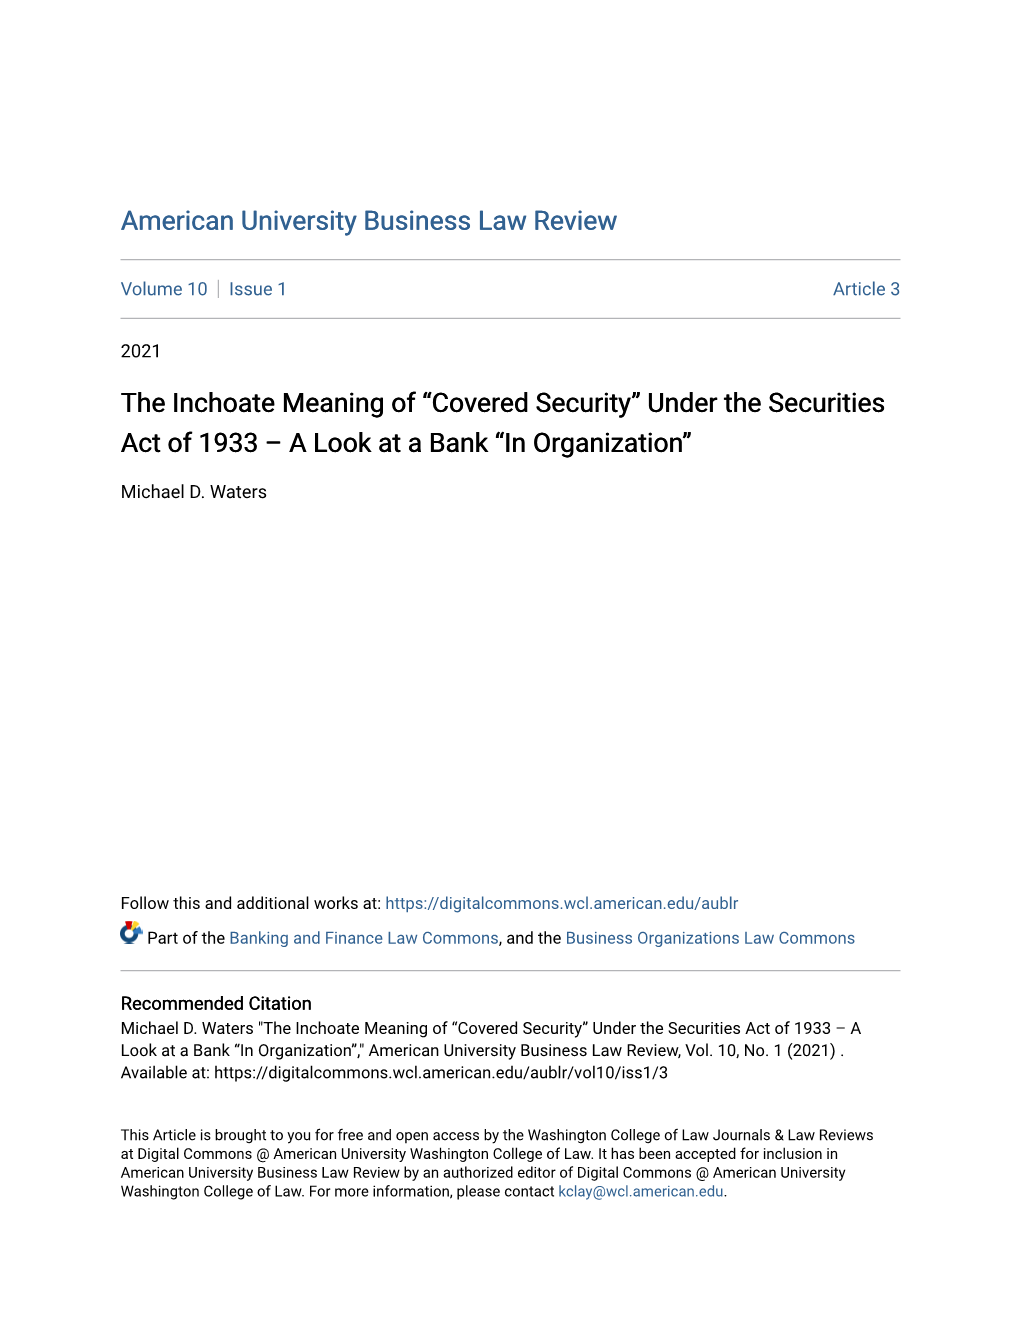 Covered Security” Under the Securities Act of 1933 – a Look at a Bank “In Organization”